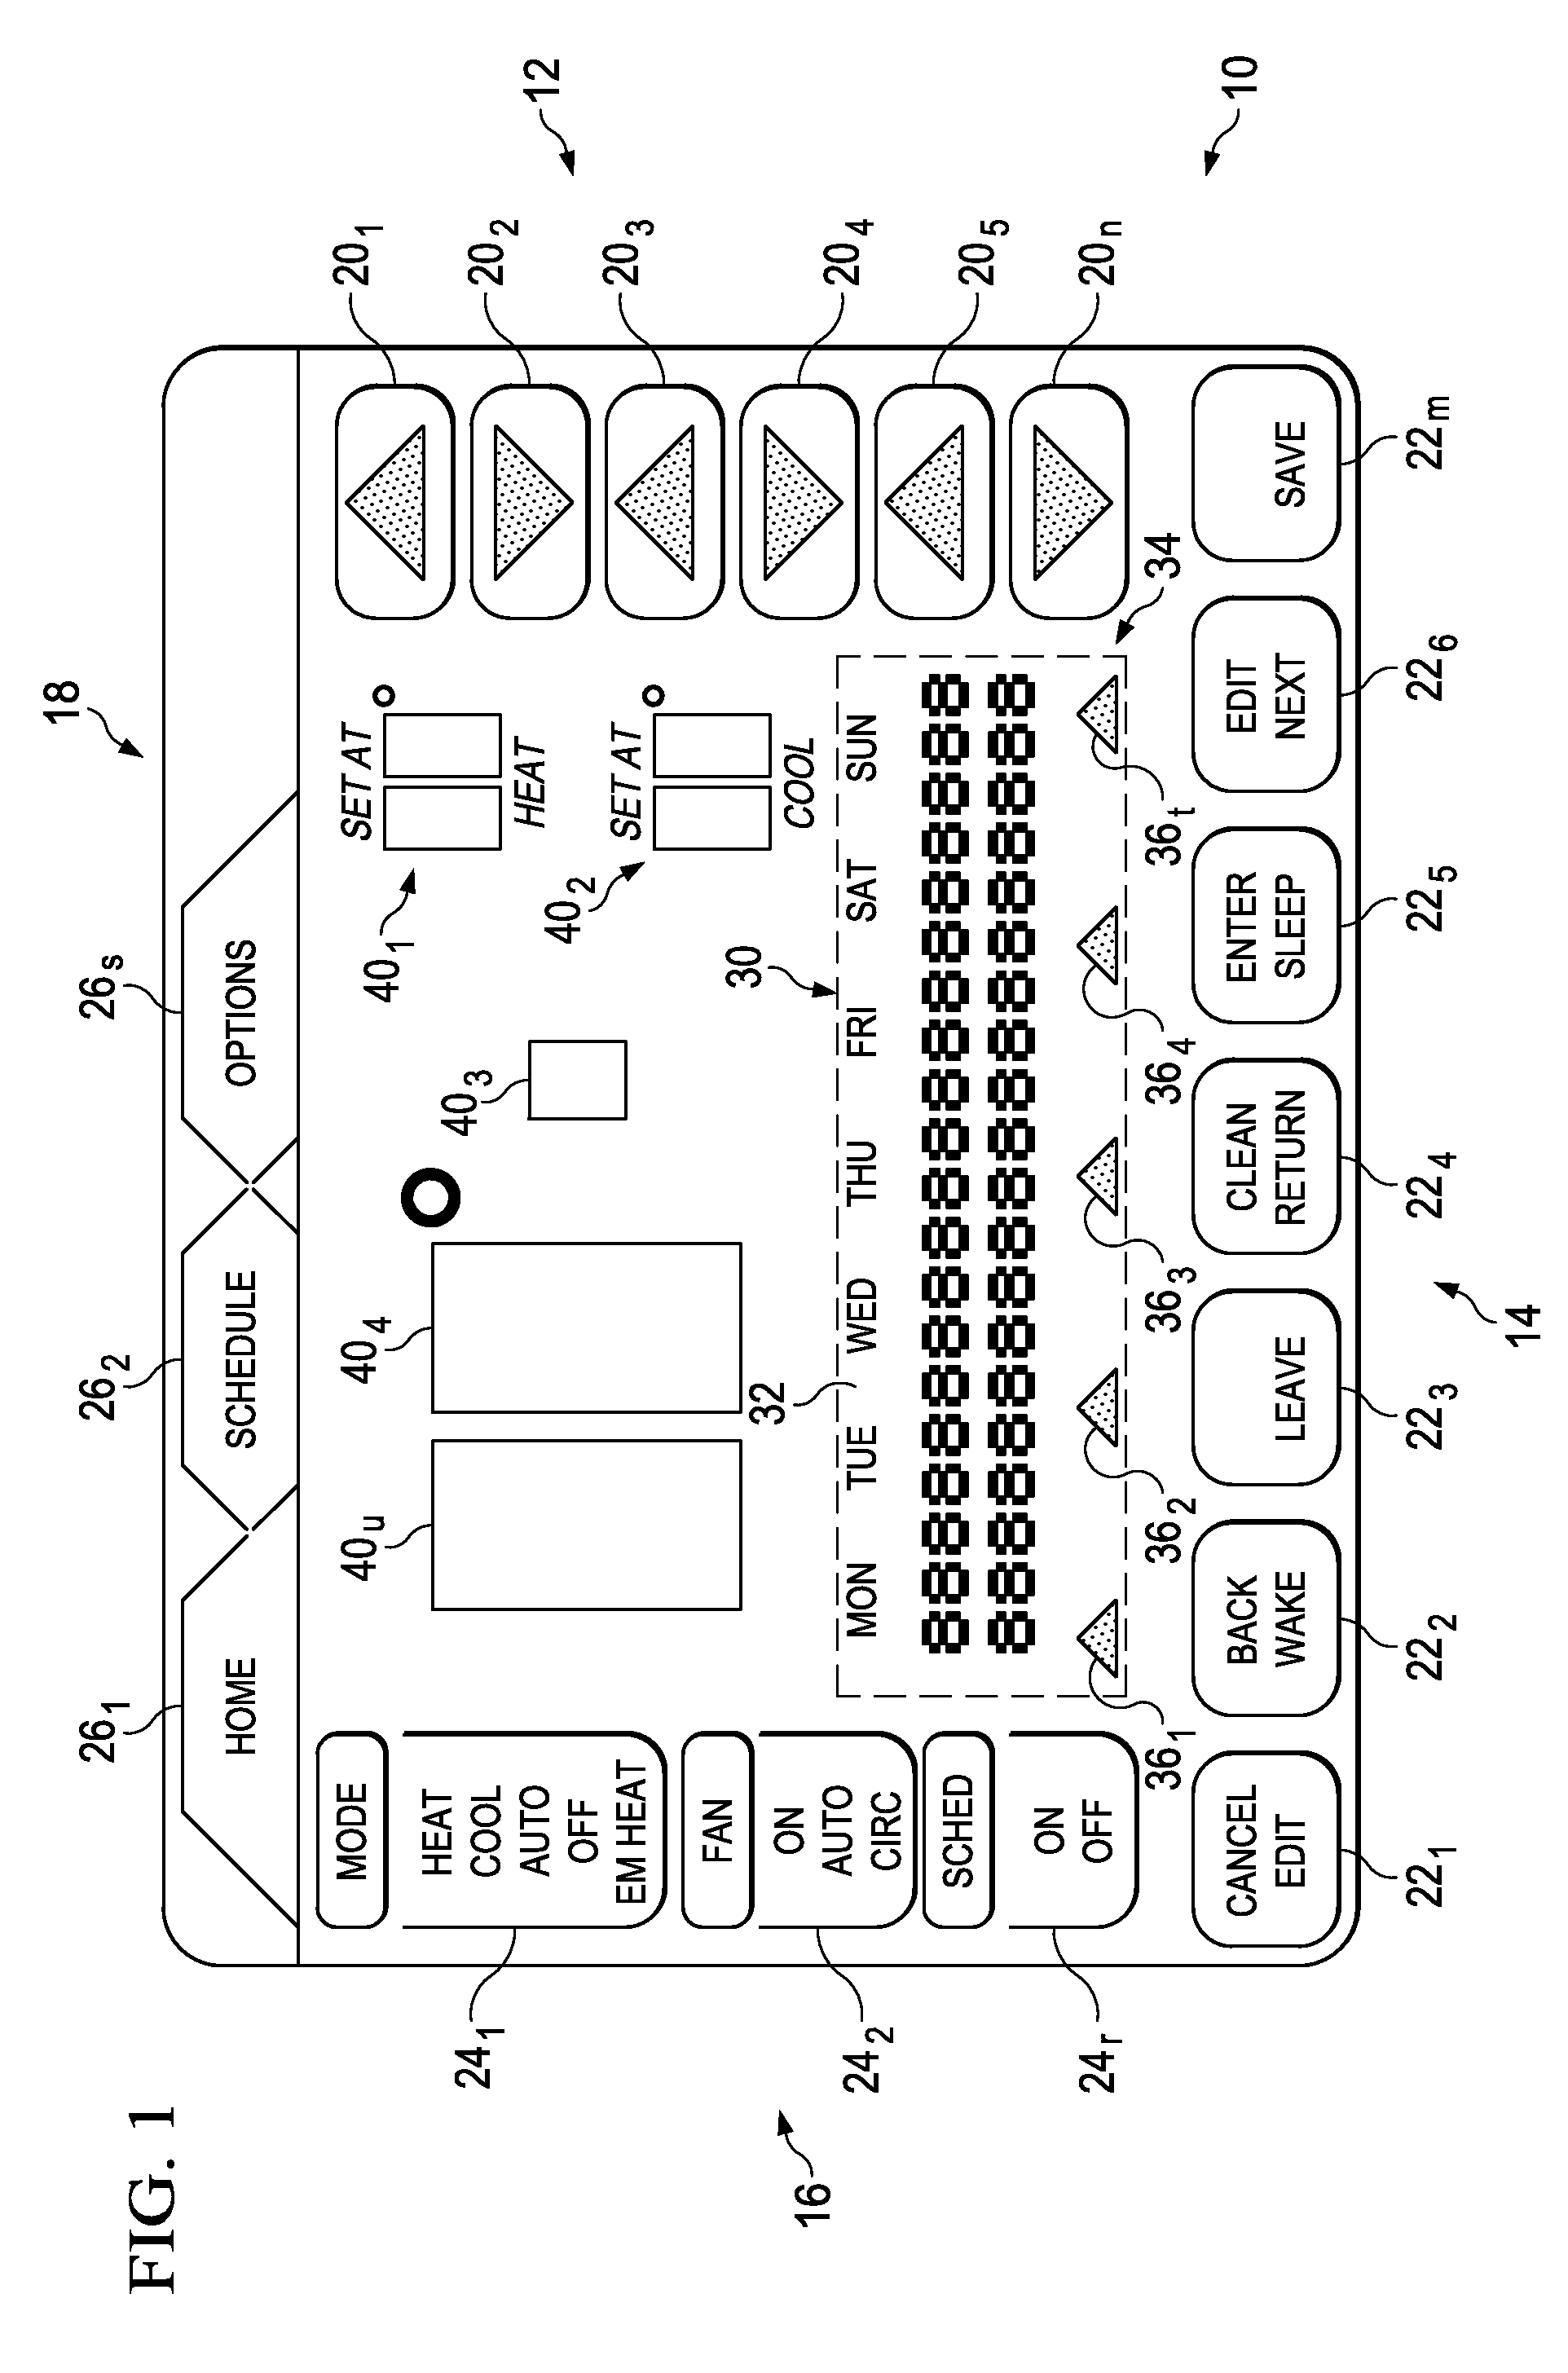 Display apparatus and method having textual system status message display capability for an enviromental control system